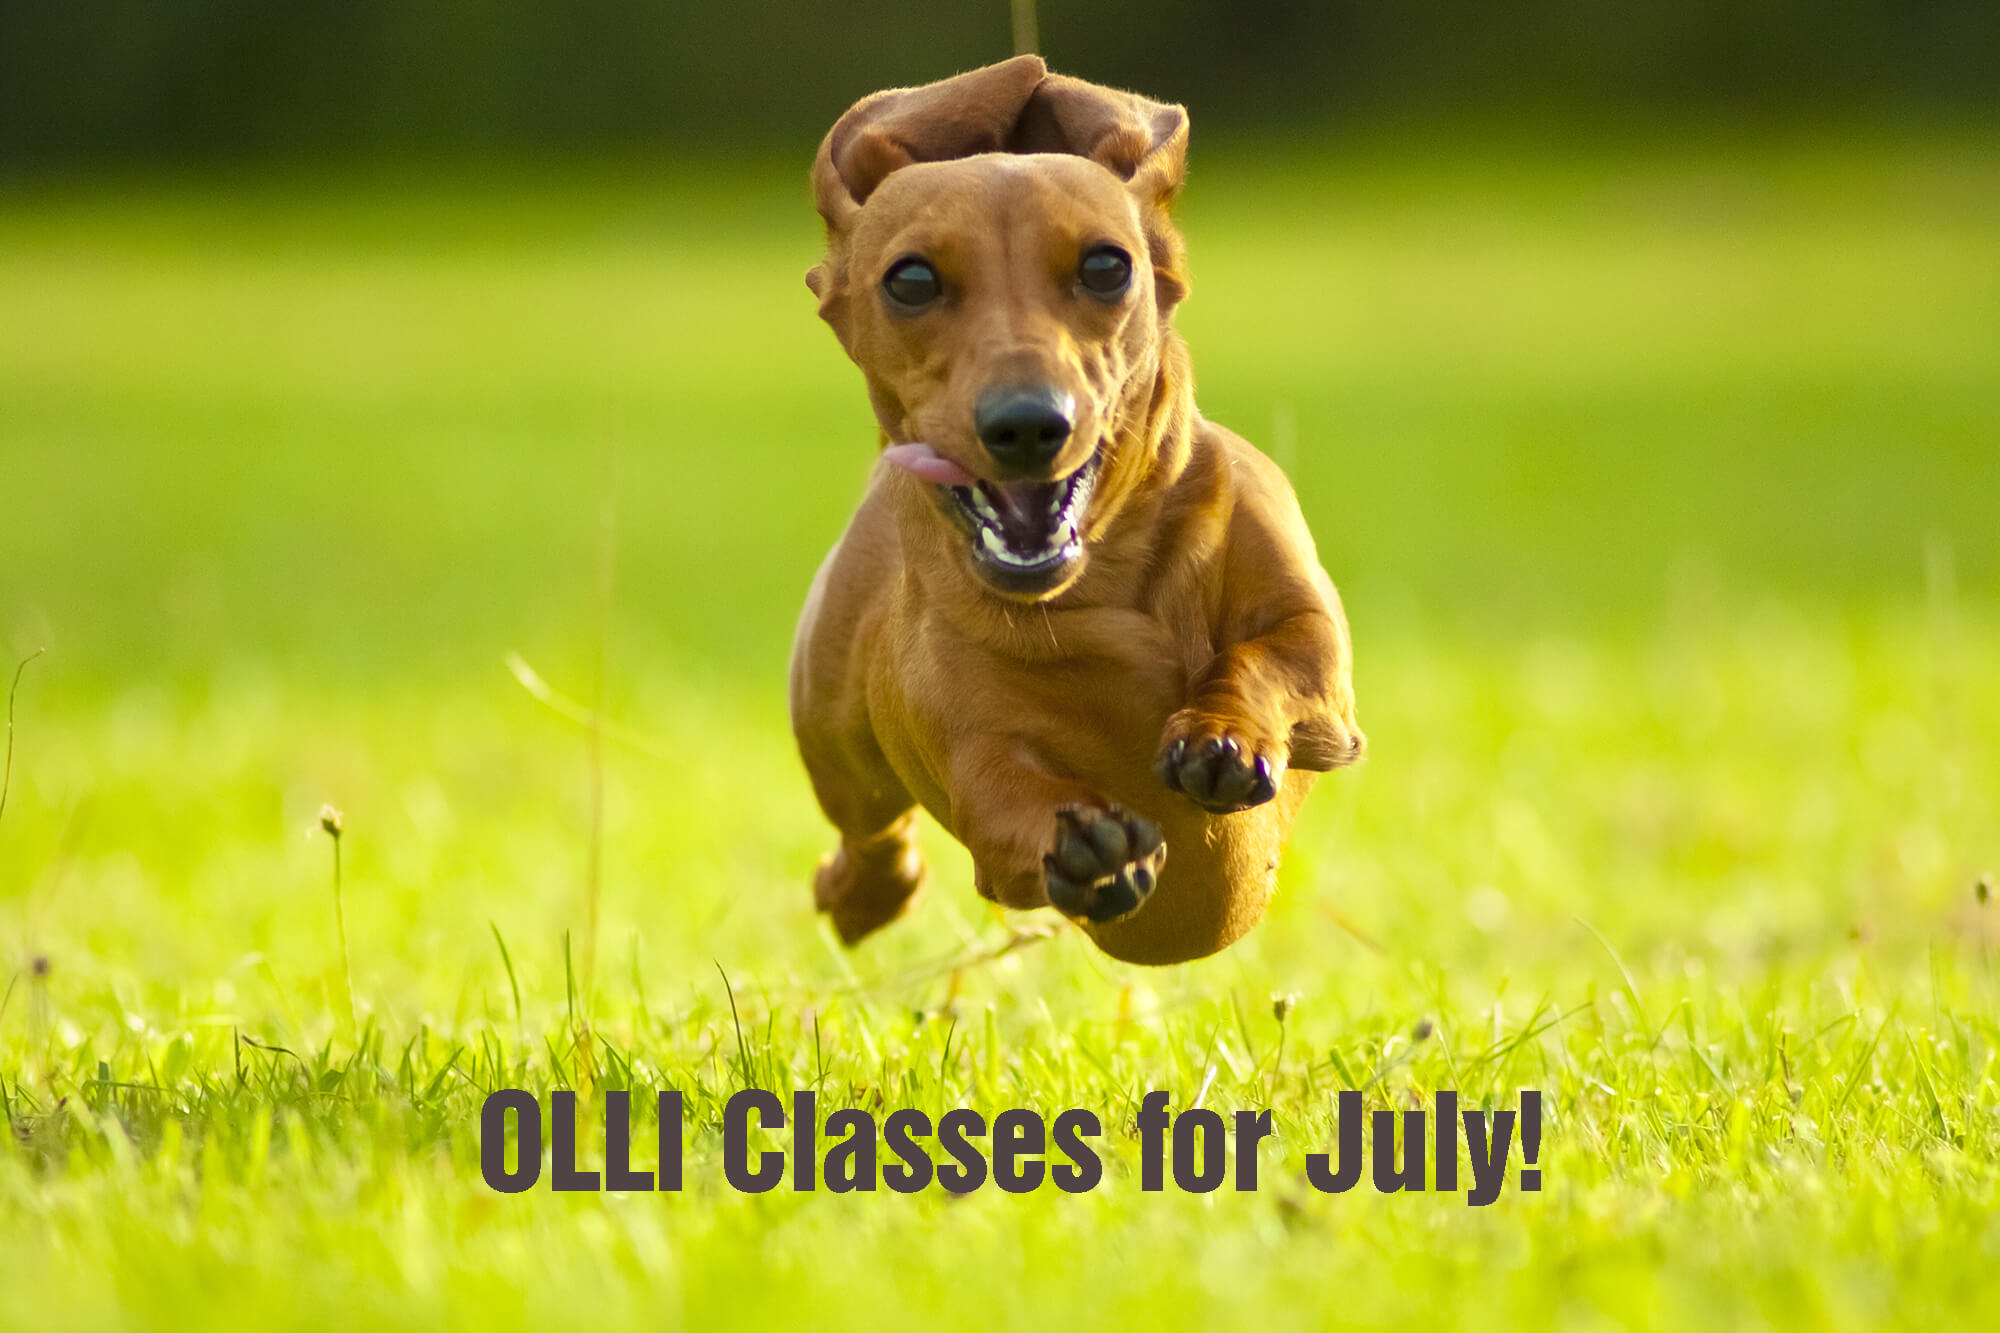 Dachshund running in the grass with the words "OLLI Classes for July!"